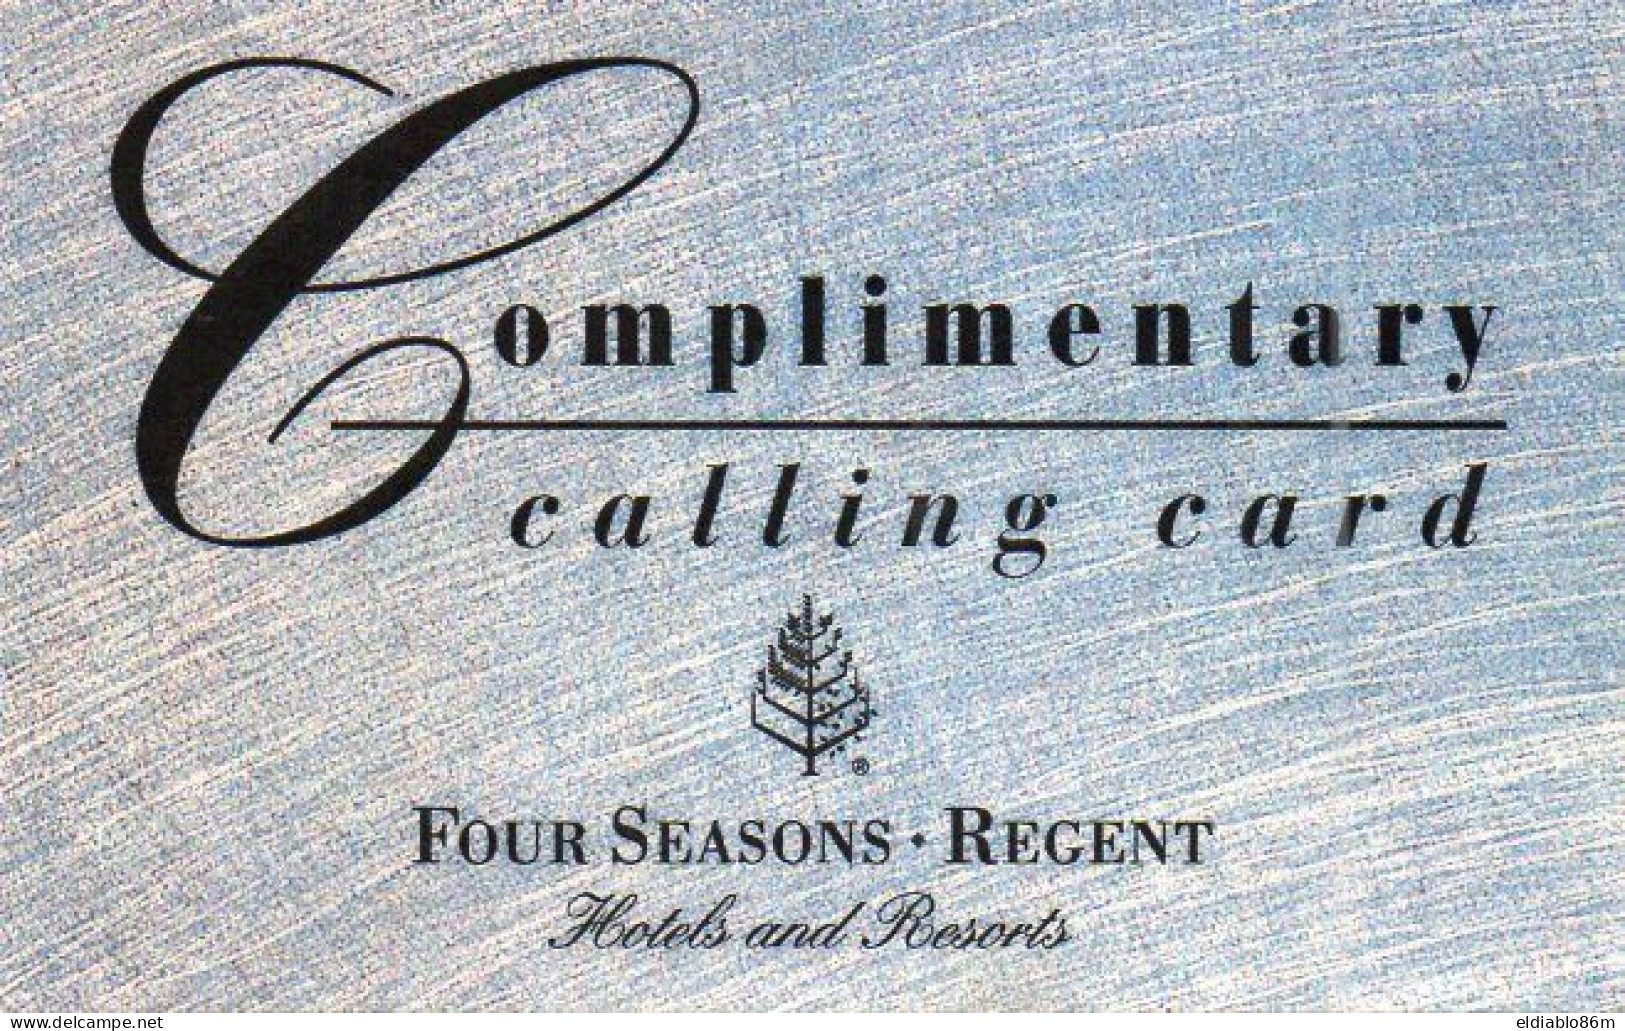 UNITED STATES - PREPAID - AT&T - COMPLIMENTARY CARD - FOUR SEASONS REGENT - HOTELS & RESORTS - AT&T